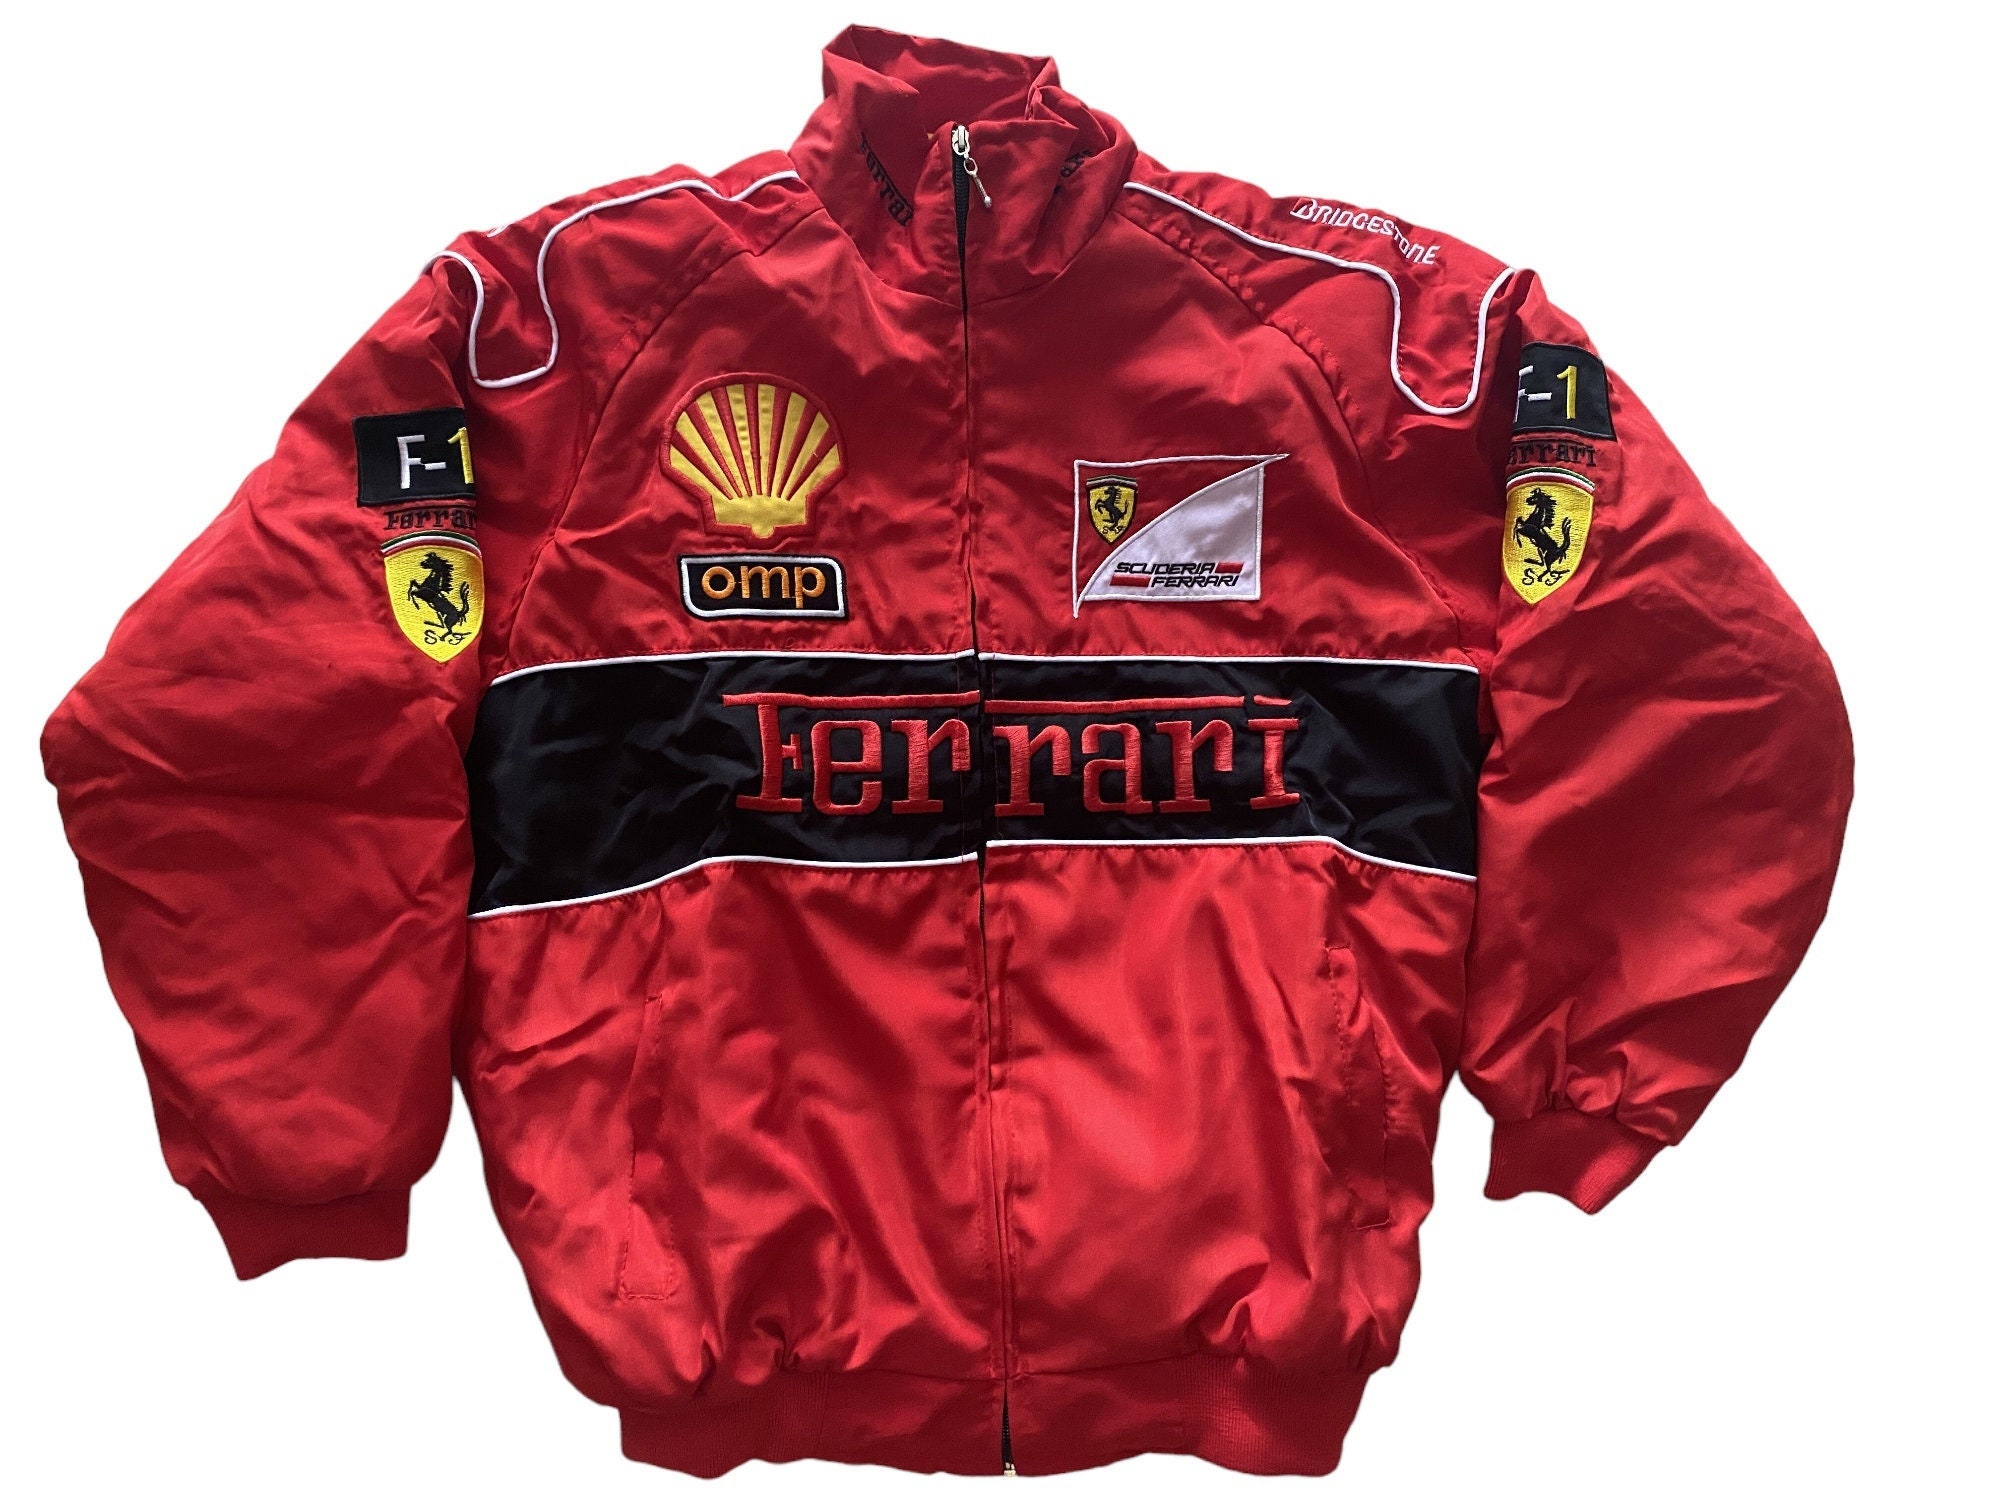 F1 shirt- does anyone know where to find this? : r/DHgate